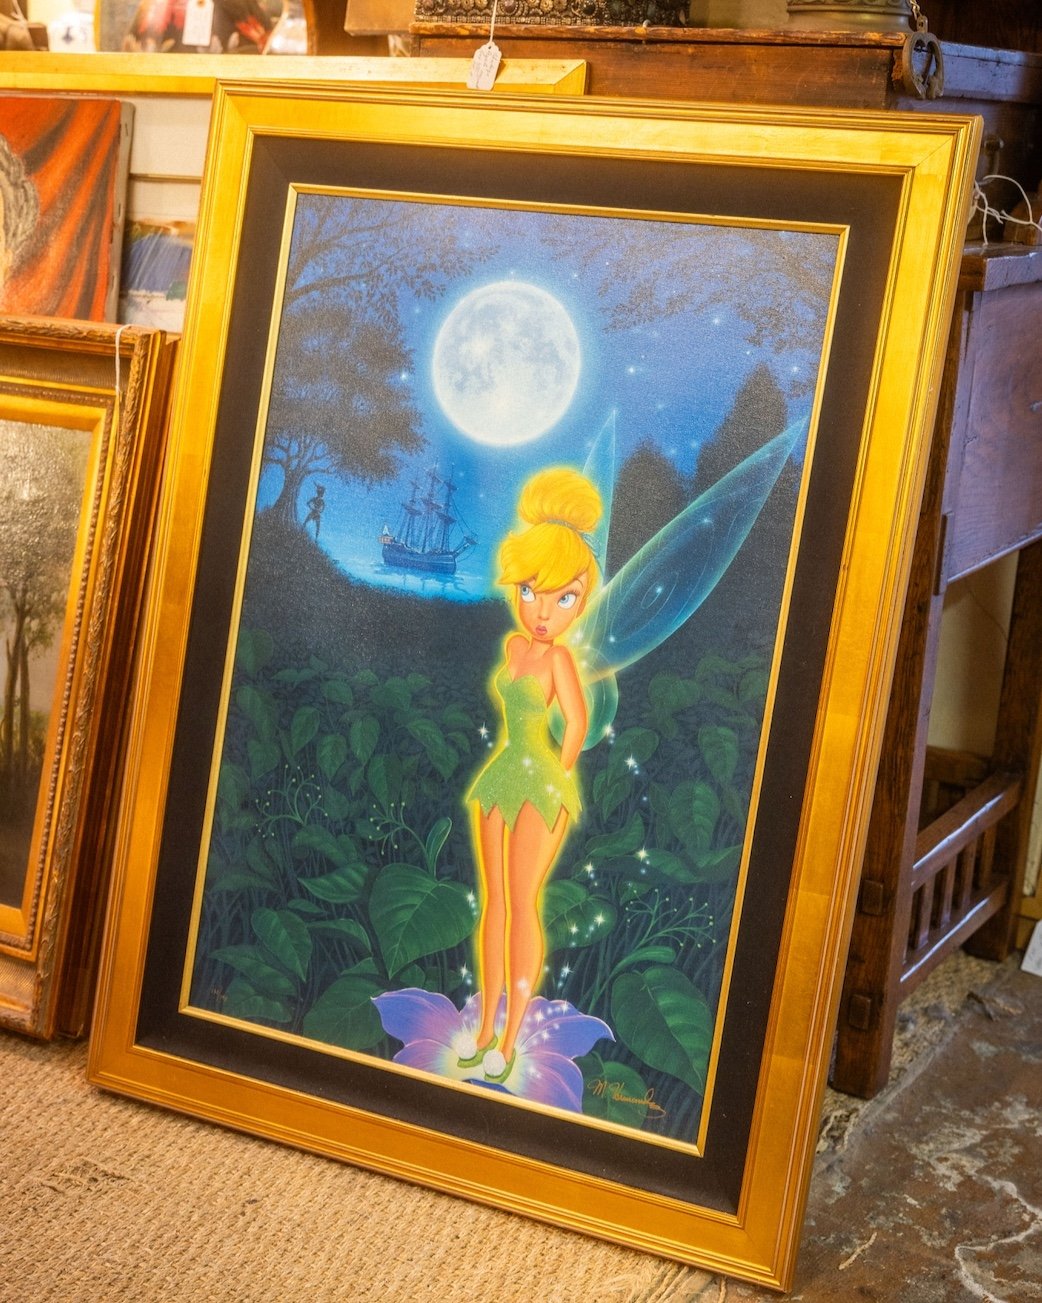 Any #Tinkerbell fans here? 🧚 ✨ If you&rsquo;re looking for original artwork and #VintagePaintings come visit us! We&rsquo;re open every day from 10am-6pm. ⠀
⠀
#AntiqueShop #ShopVintageAny #Tinkerbell fans here? 🧚 ✨ If you&rsquo;re looking for origi